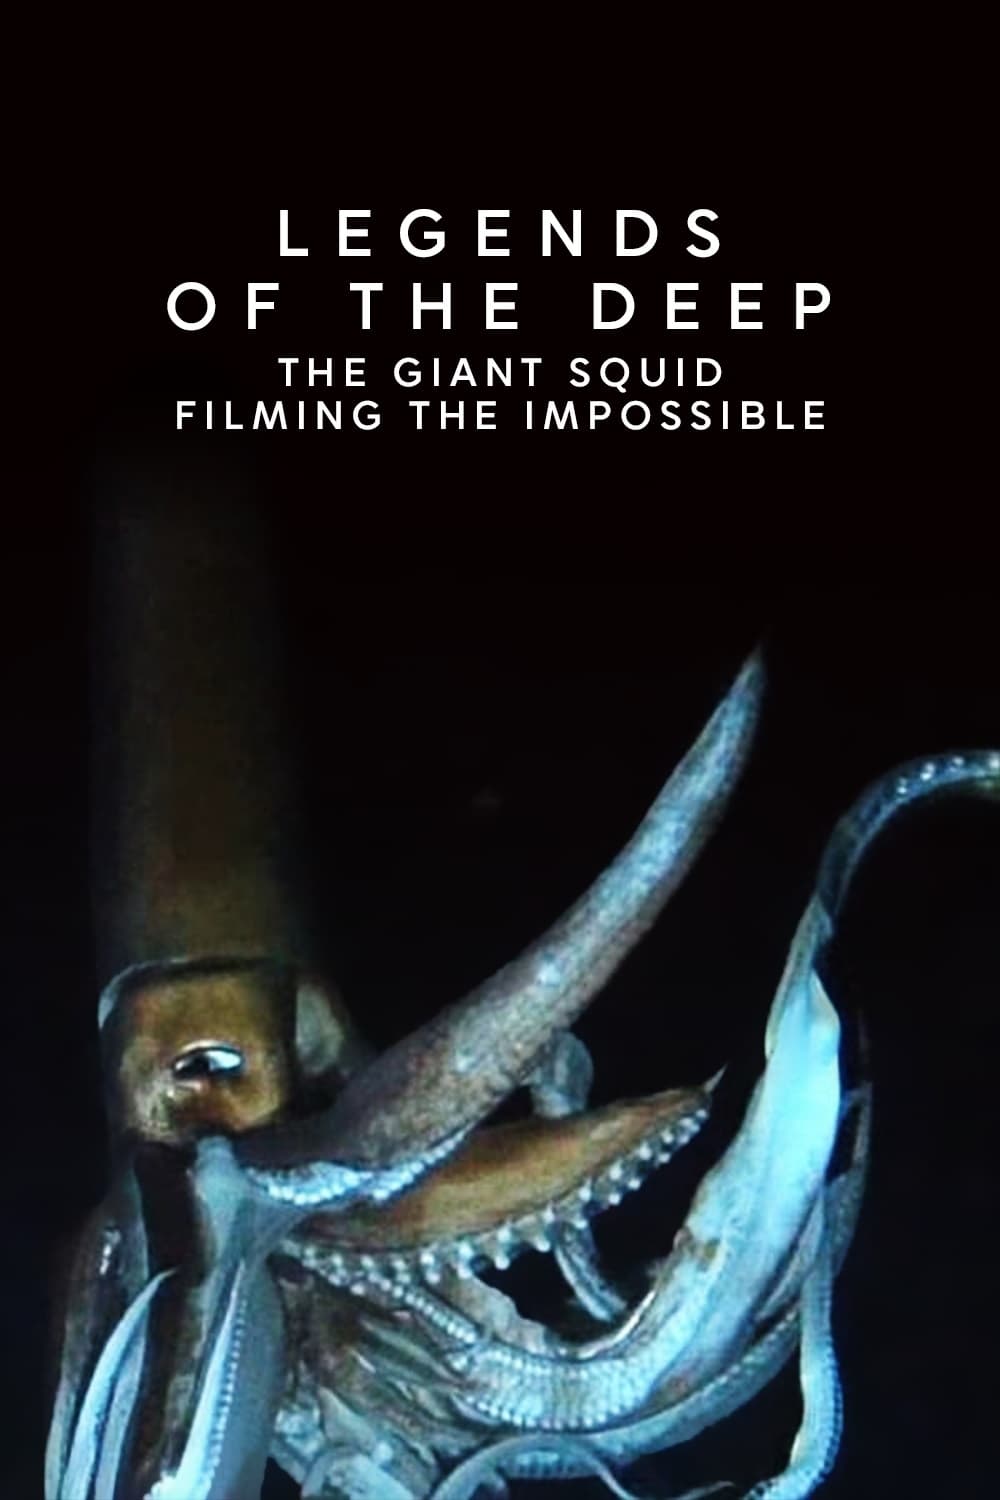 Legends of the Deep: The Giant Squid